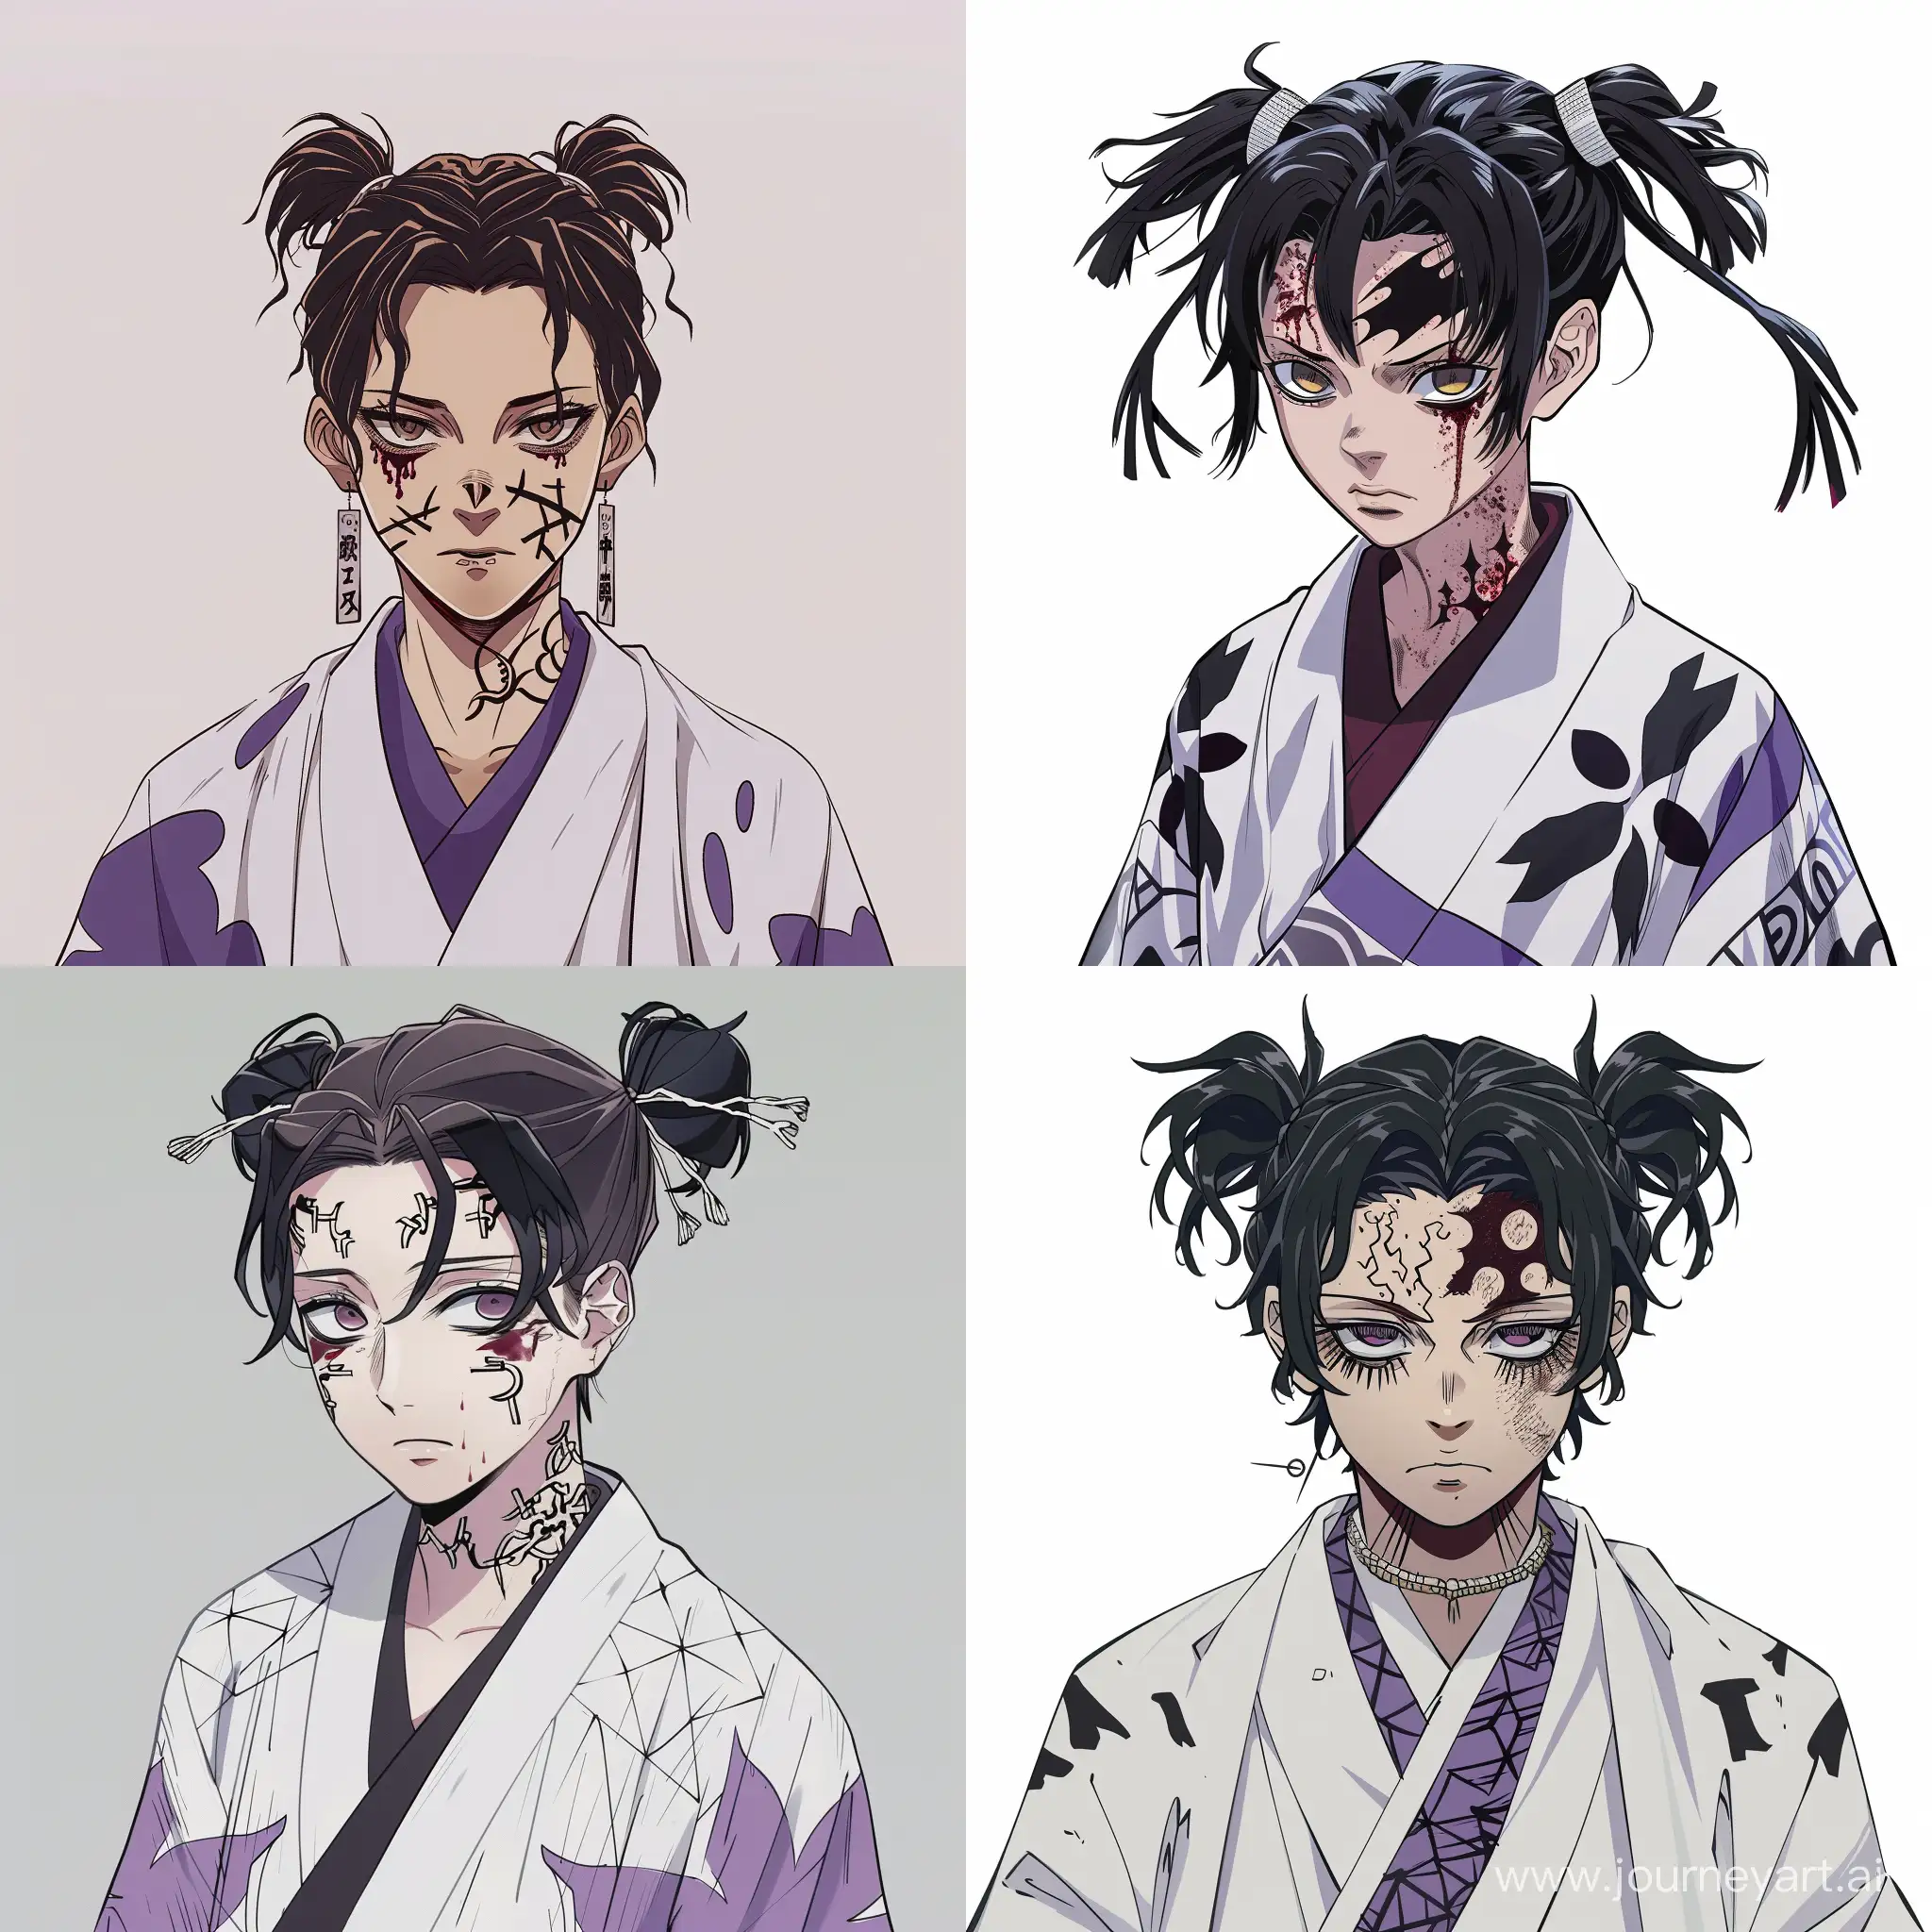 Draw a Choso from the anime Jujutsu Kaisen. Dark hair with two short ponytails, in a white and purple kimono, black patterns on the face and blood magic